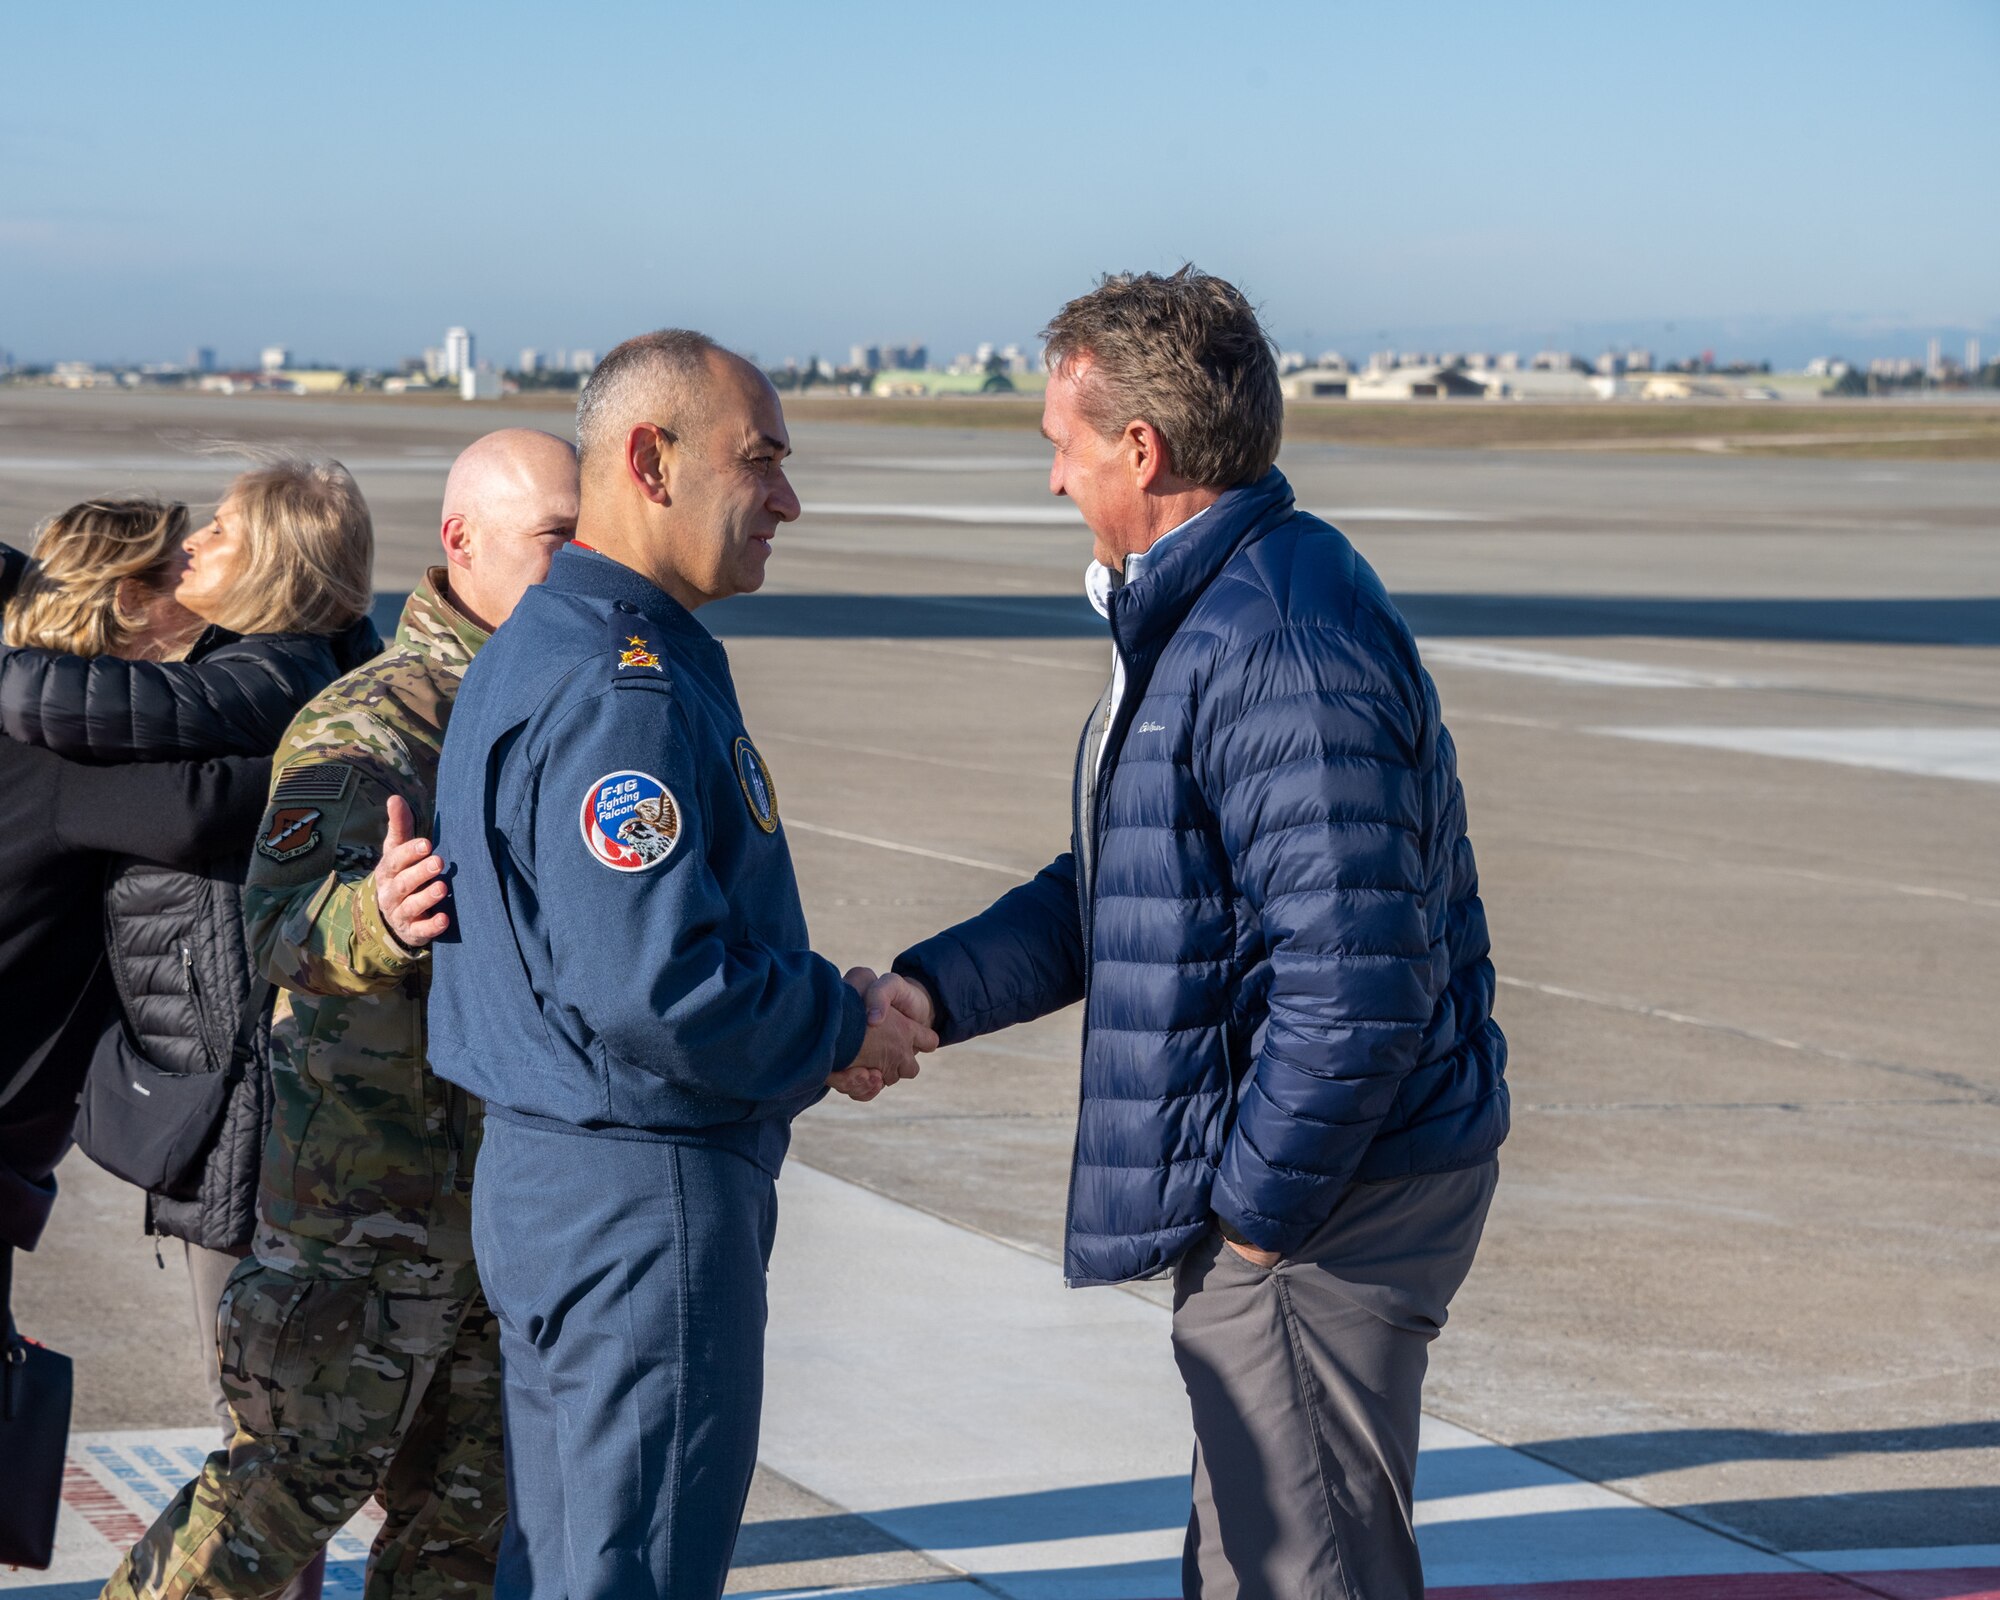 U.S. Ambassador Jeffry Flake, U.S. Ambassador to Türkiye, right, shakes hands with Brig. Gen. Mehmet Serkan Dan, 10th Tanker Base Command commander, left, after his arrival at Incirlik Air Base, Türkiye, Feb 8, 2023. Ambassador Flake visited Incirlik AB to greet members of the United States Agency for International Development’s Disaster Assistance Response Team, following a series of earthquakes that struck central-southern Türkiye on Feb 6, 2023. As Ambassador to Türkiye, Flake holds the highest civilian position as The Chief of Mission, and impacts the communication and resources of U.S. personnel, advancing the U.S. foreign policy goals. As a fellow NATO ally, the U.S. Government mobilized personnel to assist in Türkiye in their response efforts. (U.S. Air Force photo by Senior Airman David D. McLoney)